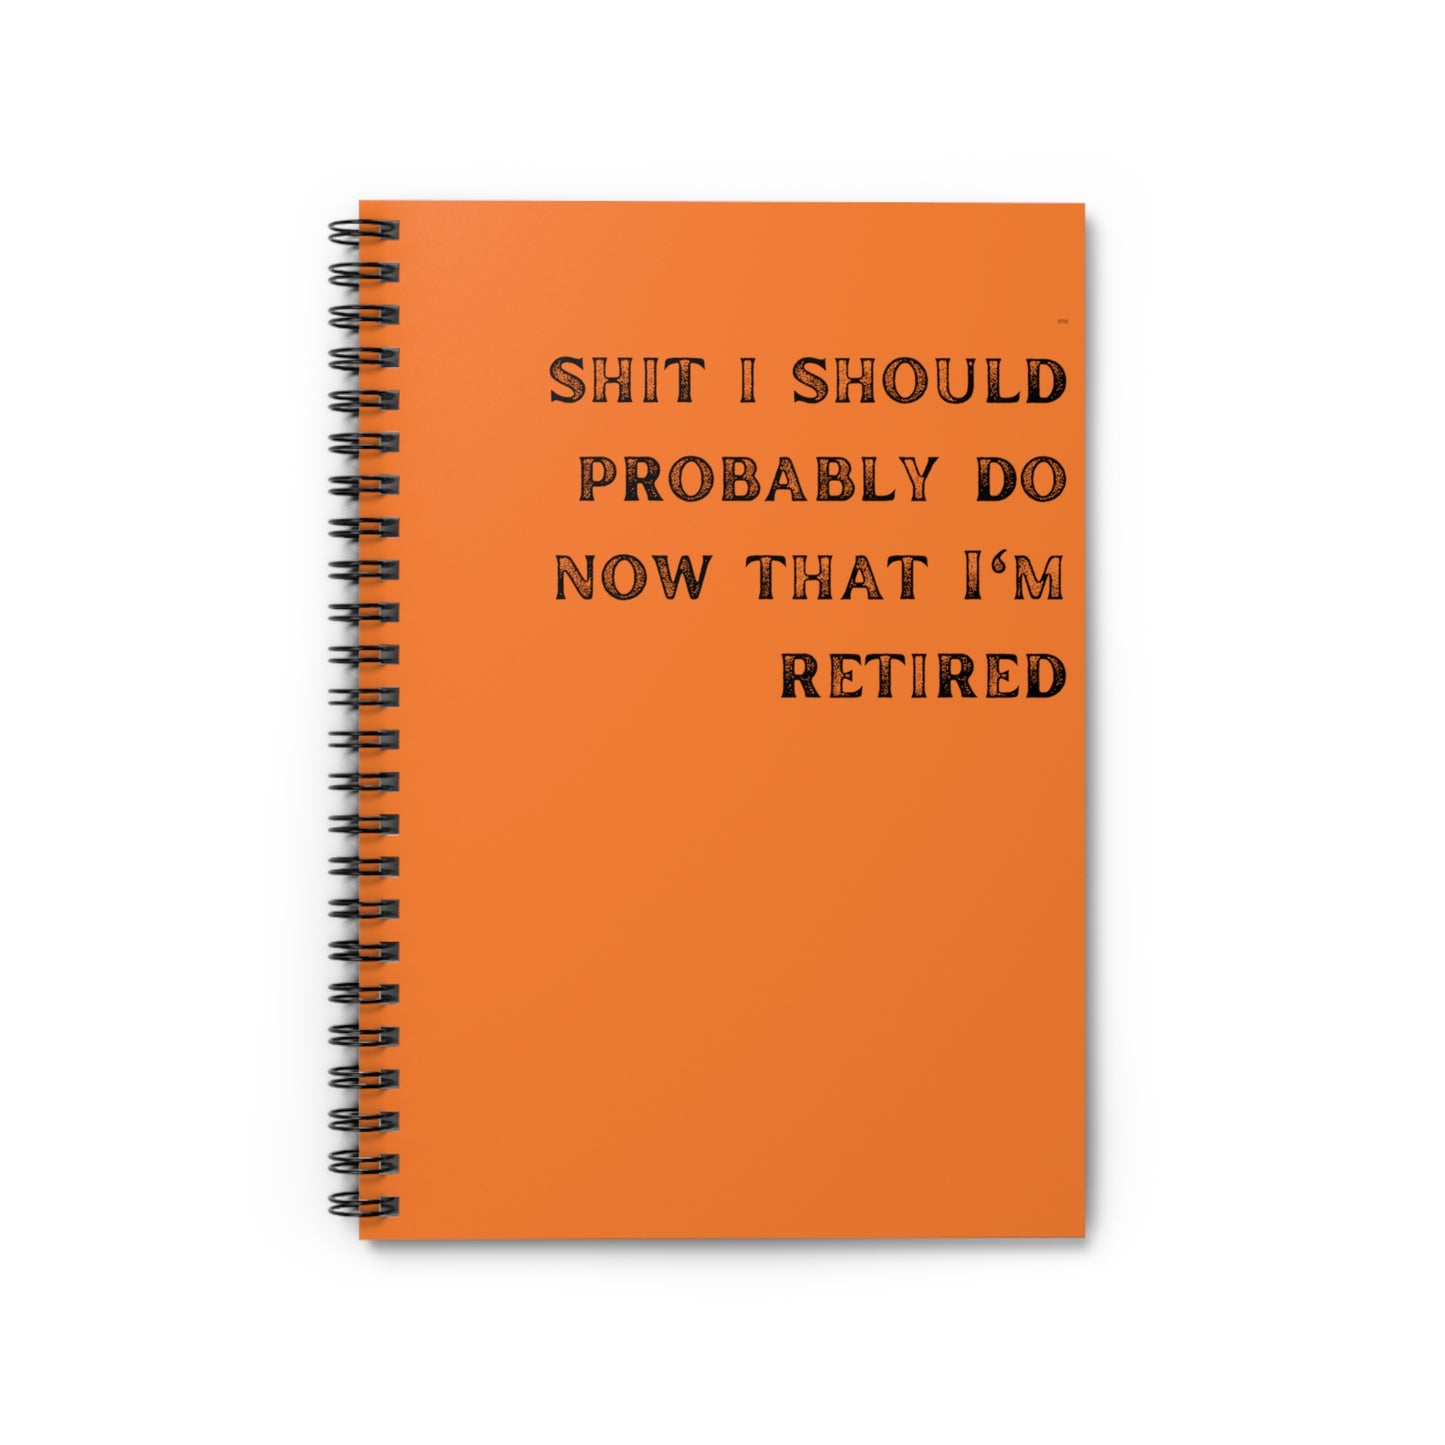 Shit I should probably do that I'm retired, notebook, spiral, retirement gift, boss gift, early retirement